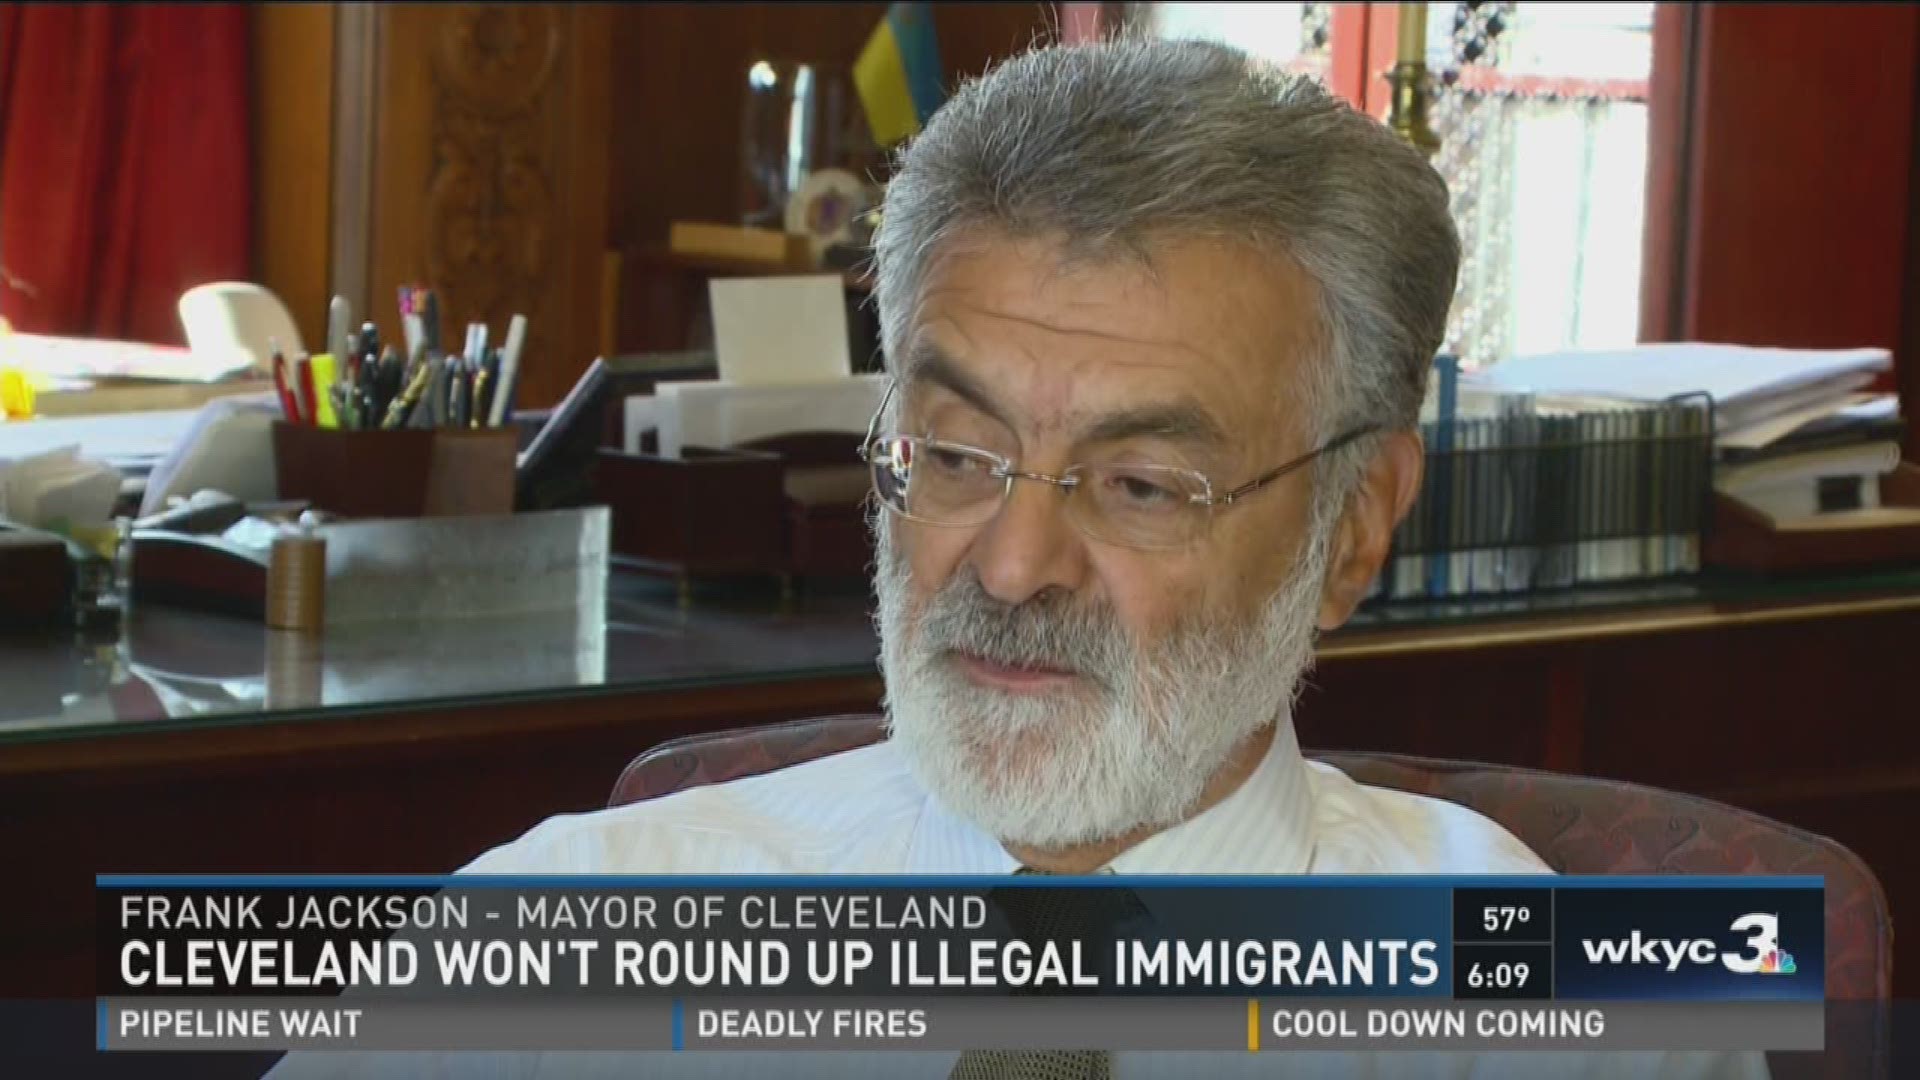 Cleveland won't round up illegal immigrants